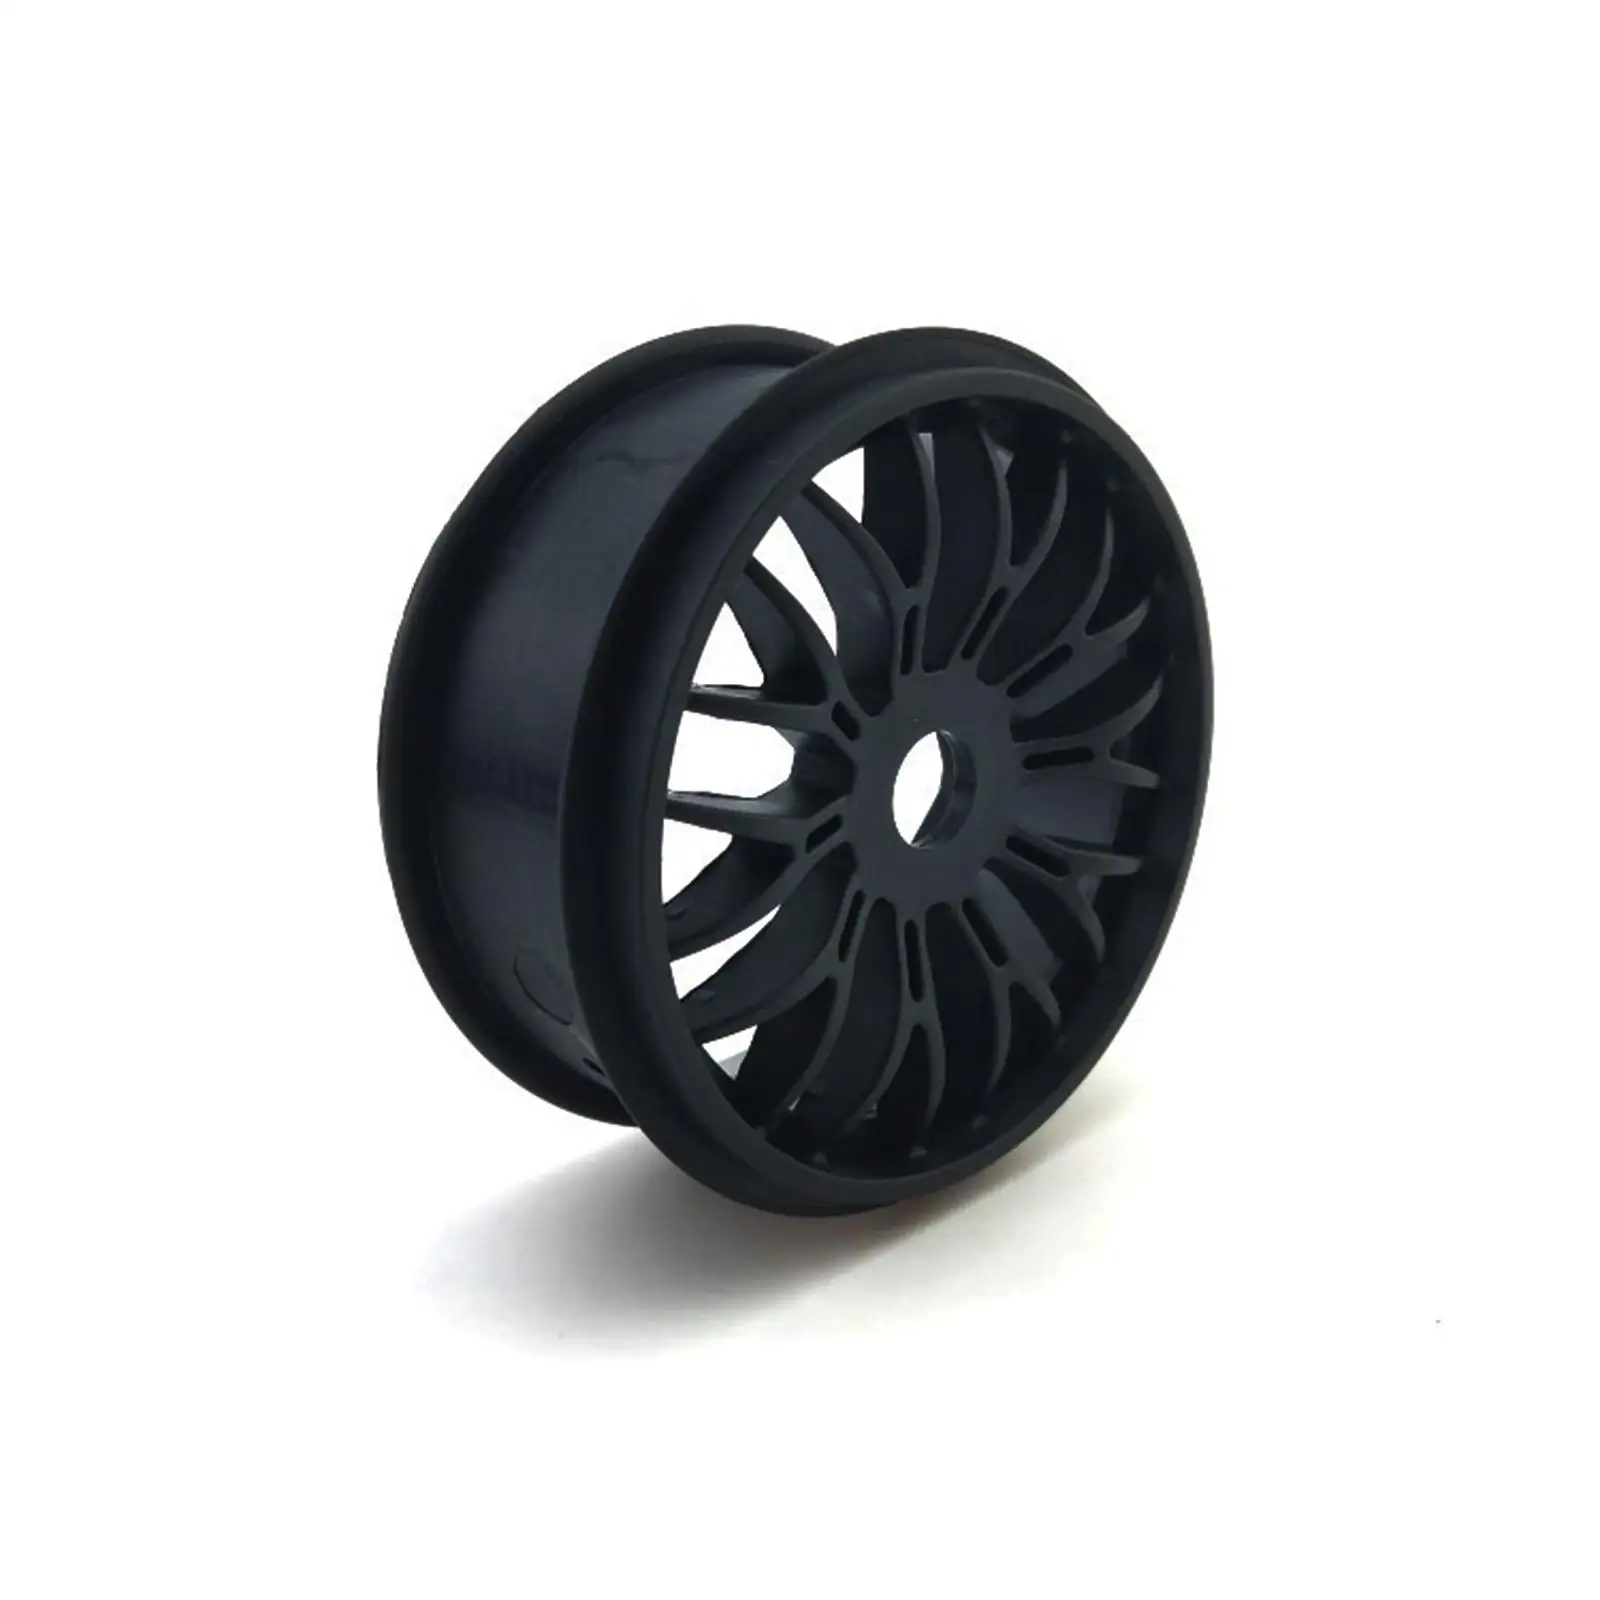 4Pcs RC Wheel Rims 1/7 1:7 17mm Rubber Black RC Car Replacement Model Set Parts for Tamiya RC Car Off Road Crawlers Buggy